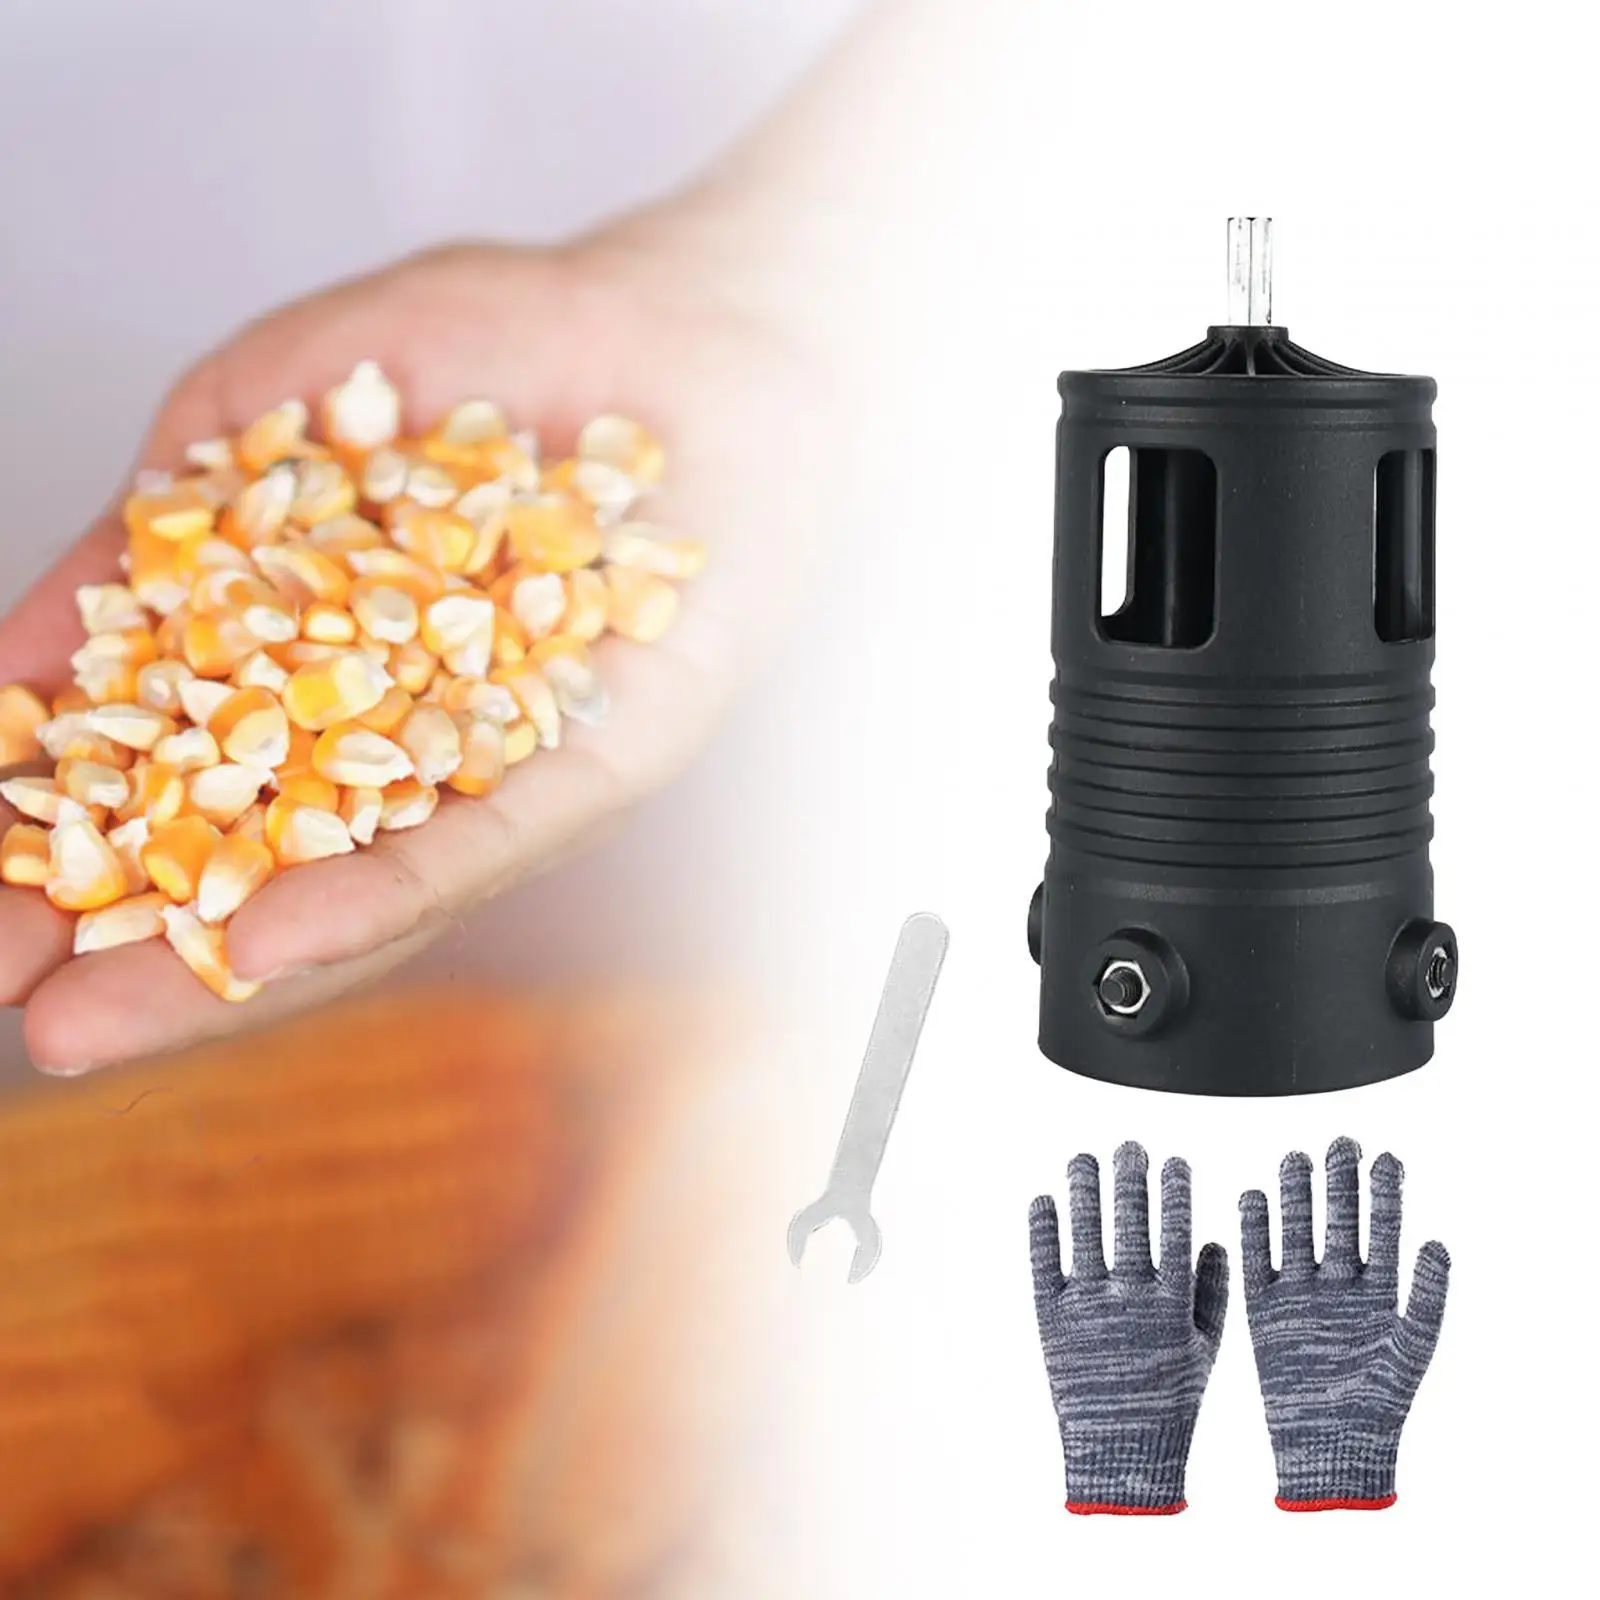 Corn Stripper Tool Use with Electric Drill Practical Household Tools with Gloves Portable Durable Hands Free Corn Sheller